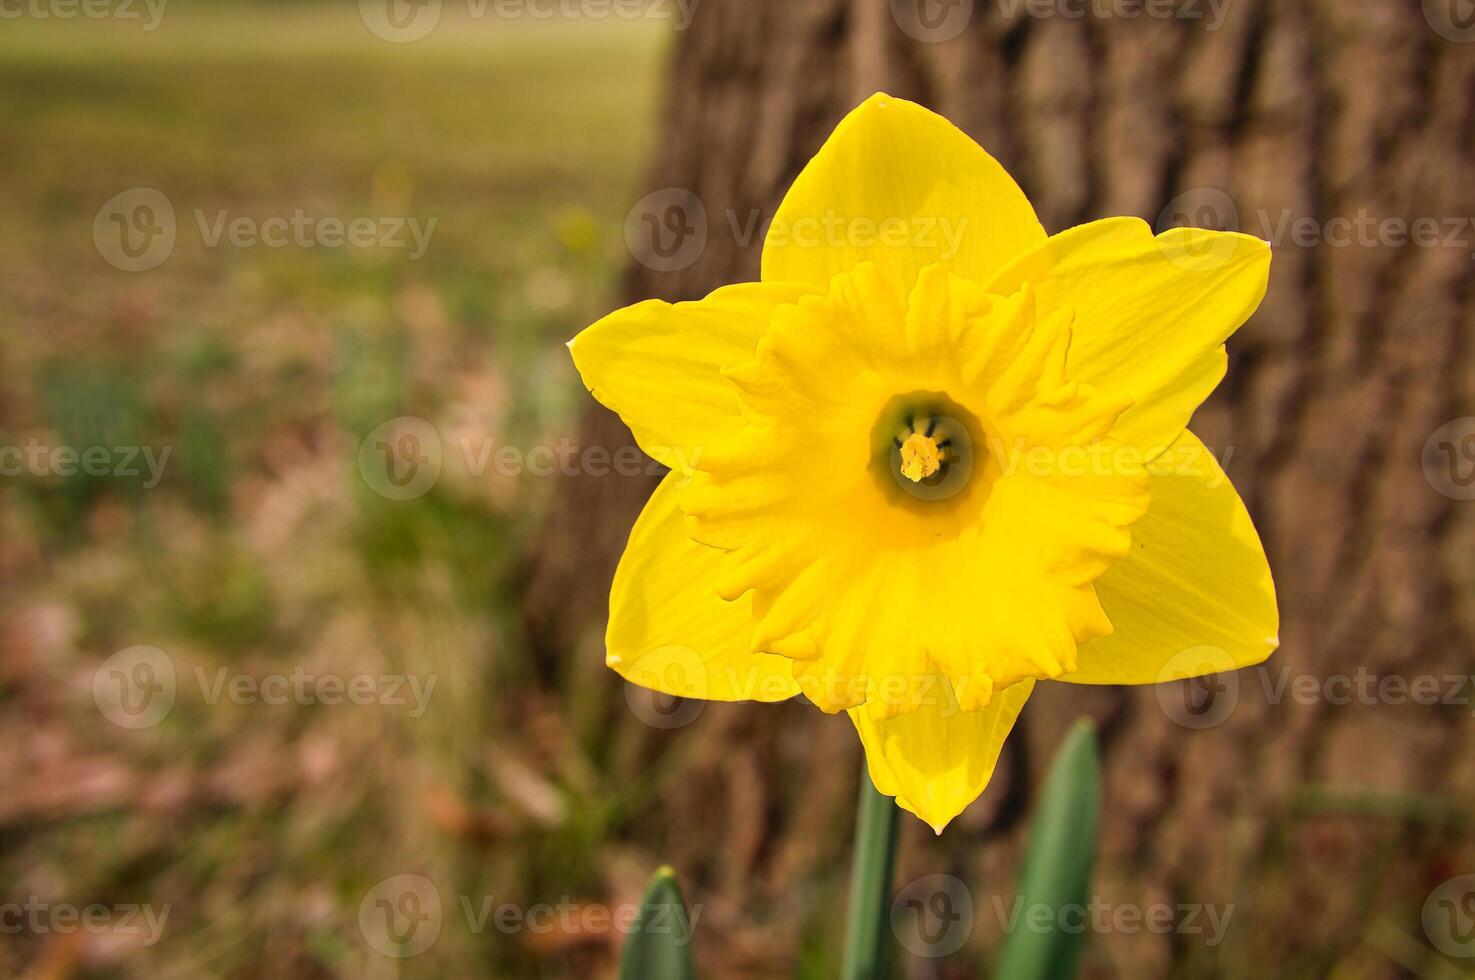 Daffodils at Easter time on a meadow. Yellow flowers shine against the green grass photo